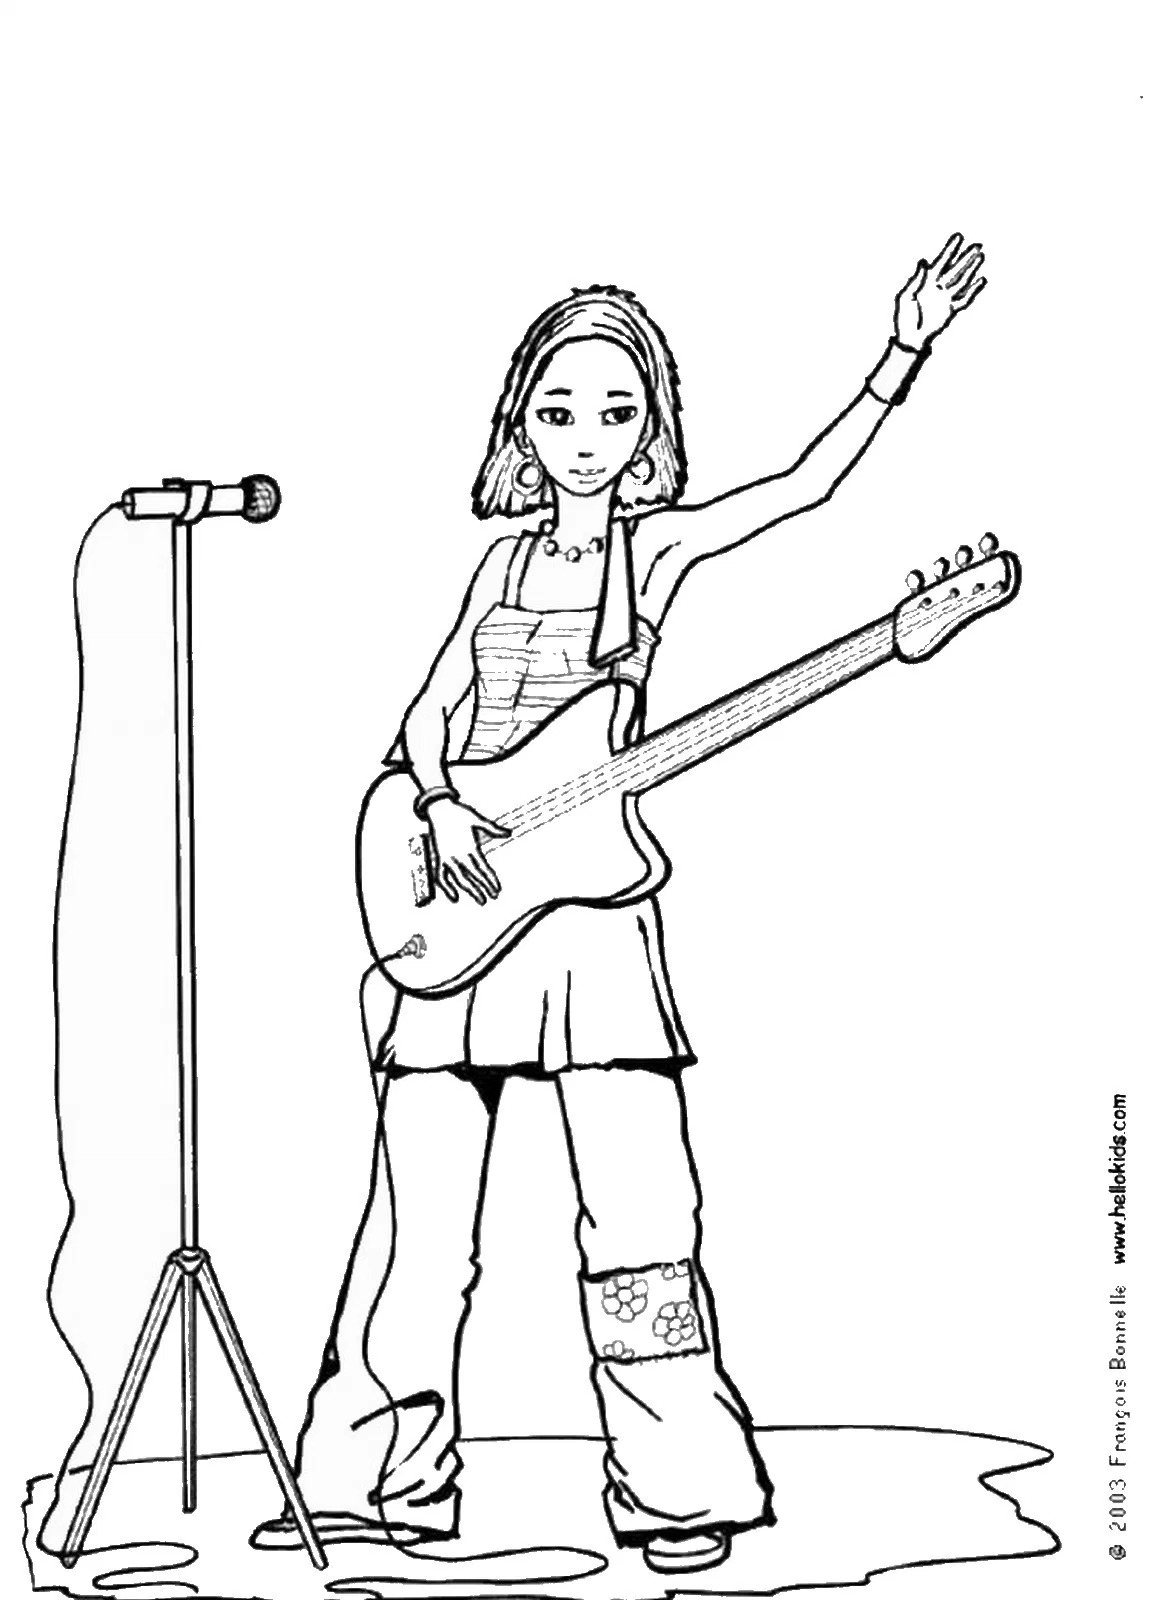 Rock Star Coloring Pages at GetColorings.com | Free printable colorings ...